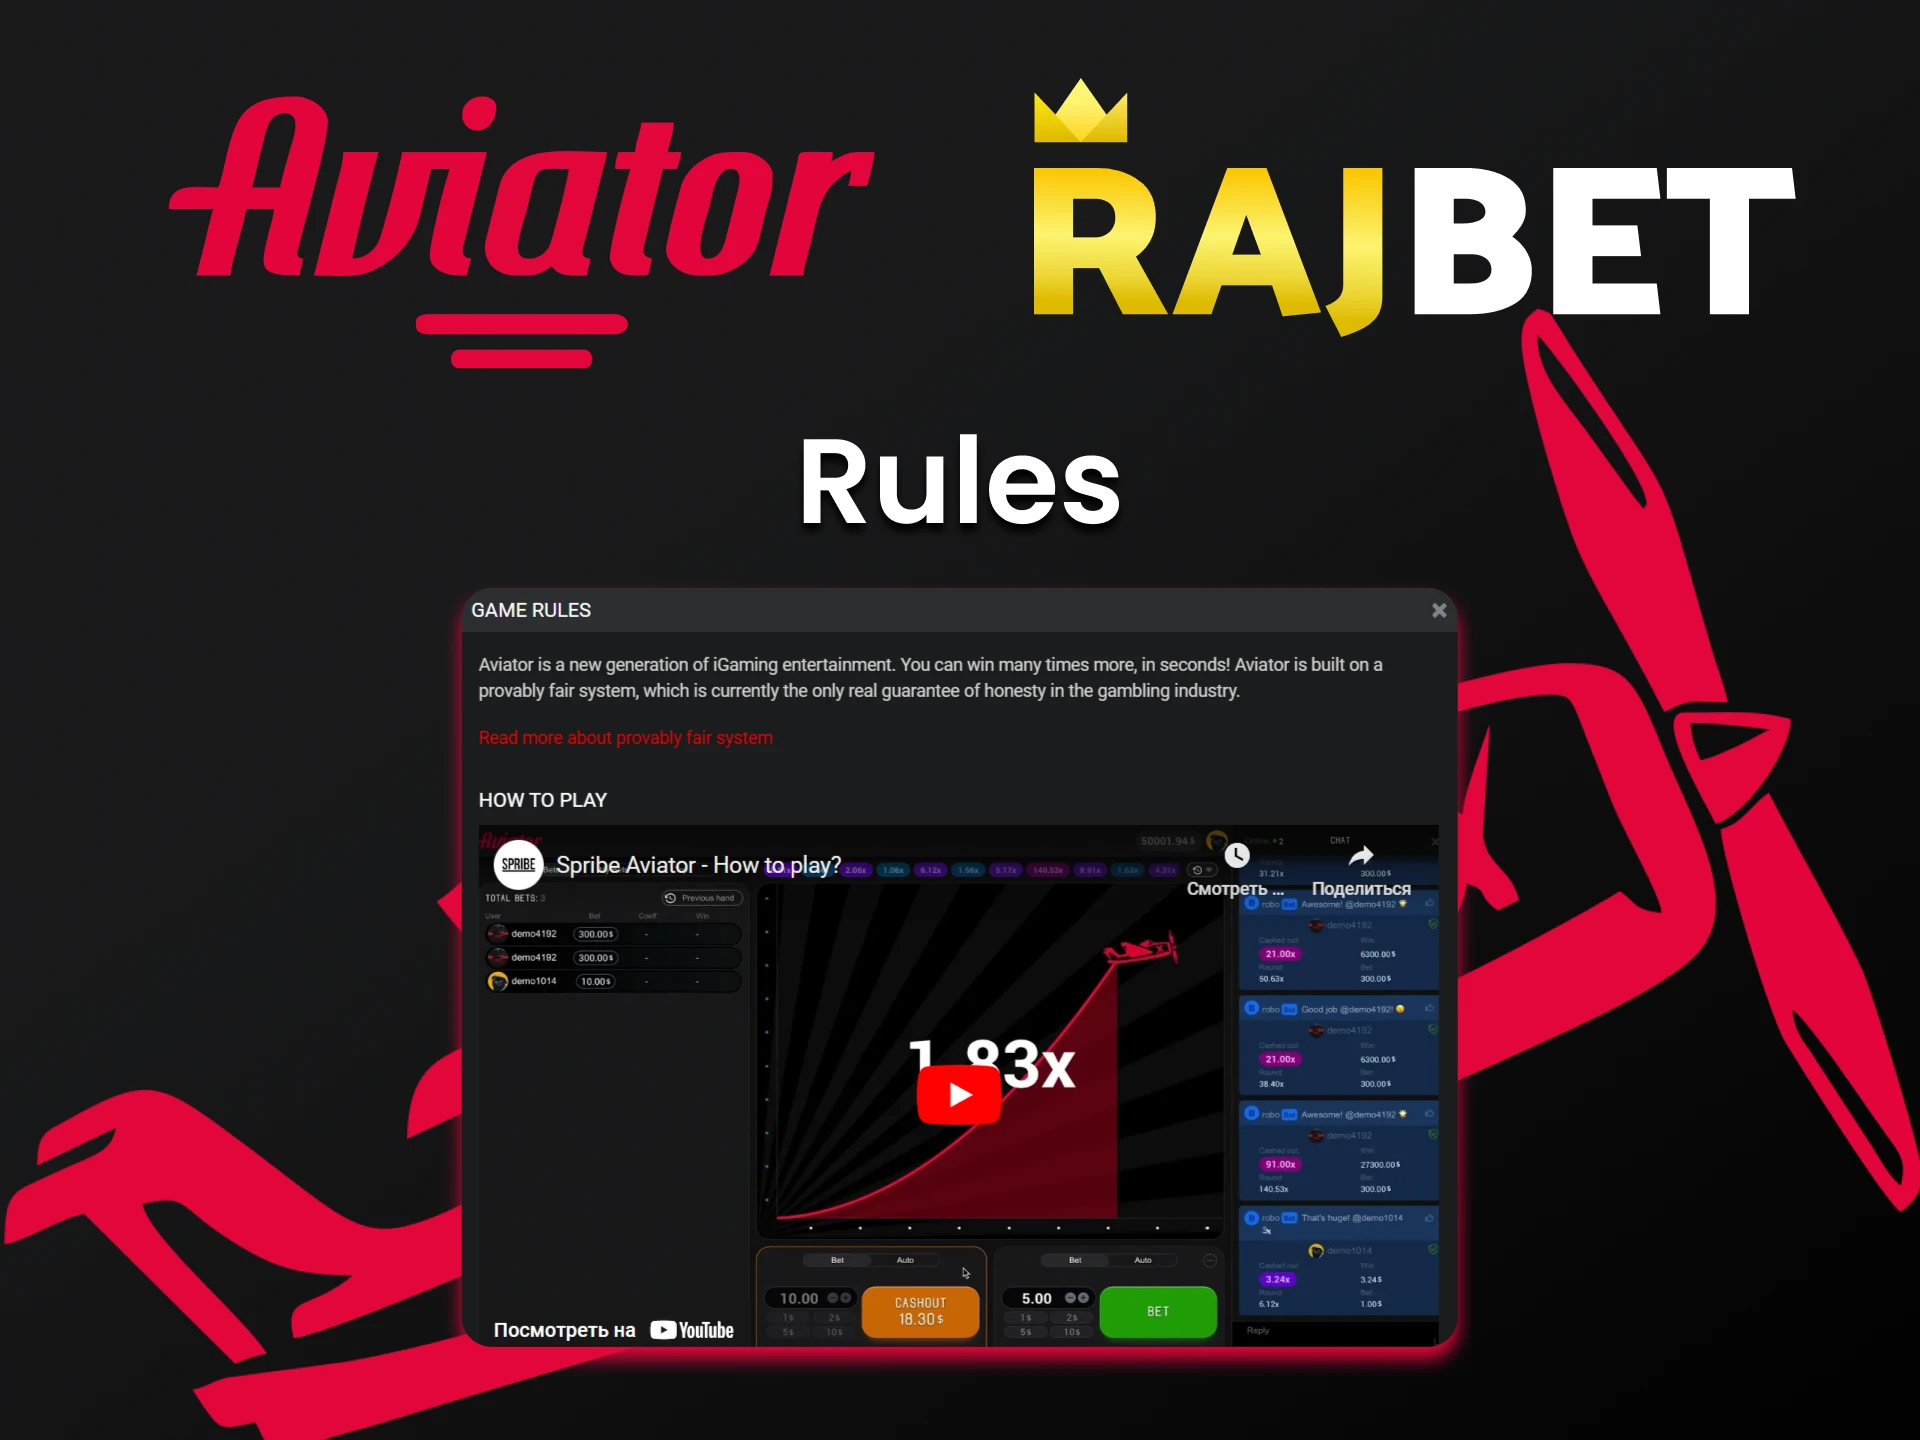 Learn the rules of the Aviator game on Rajbet.